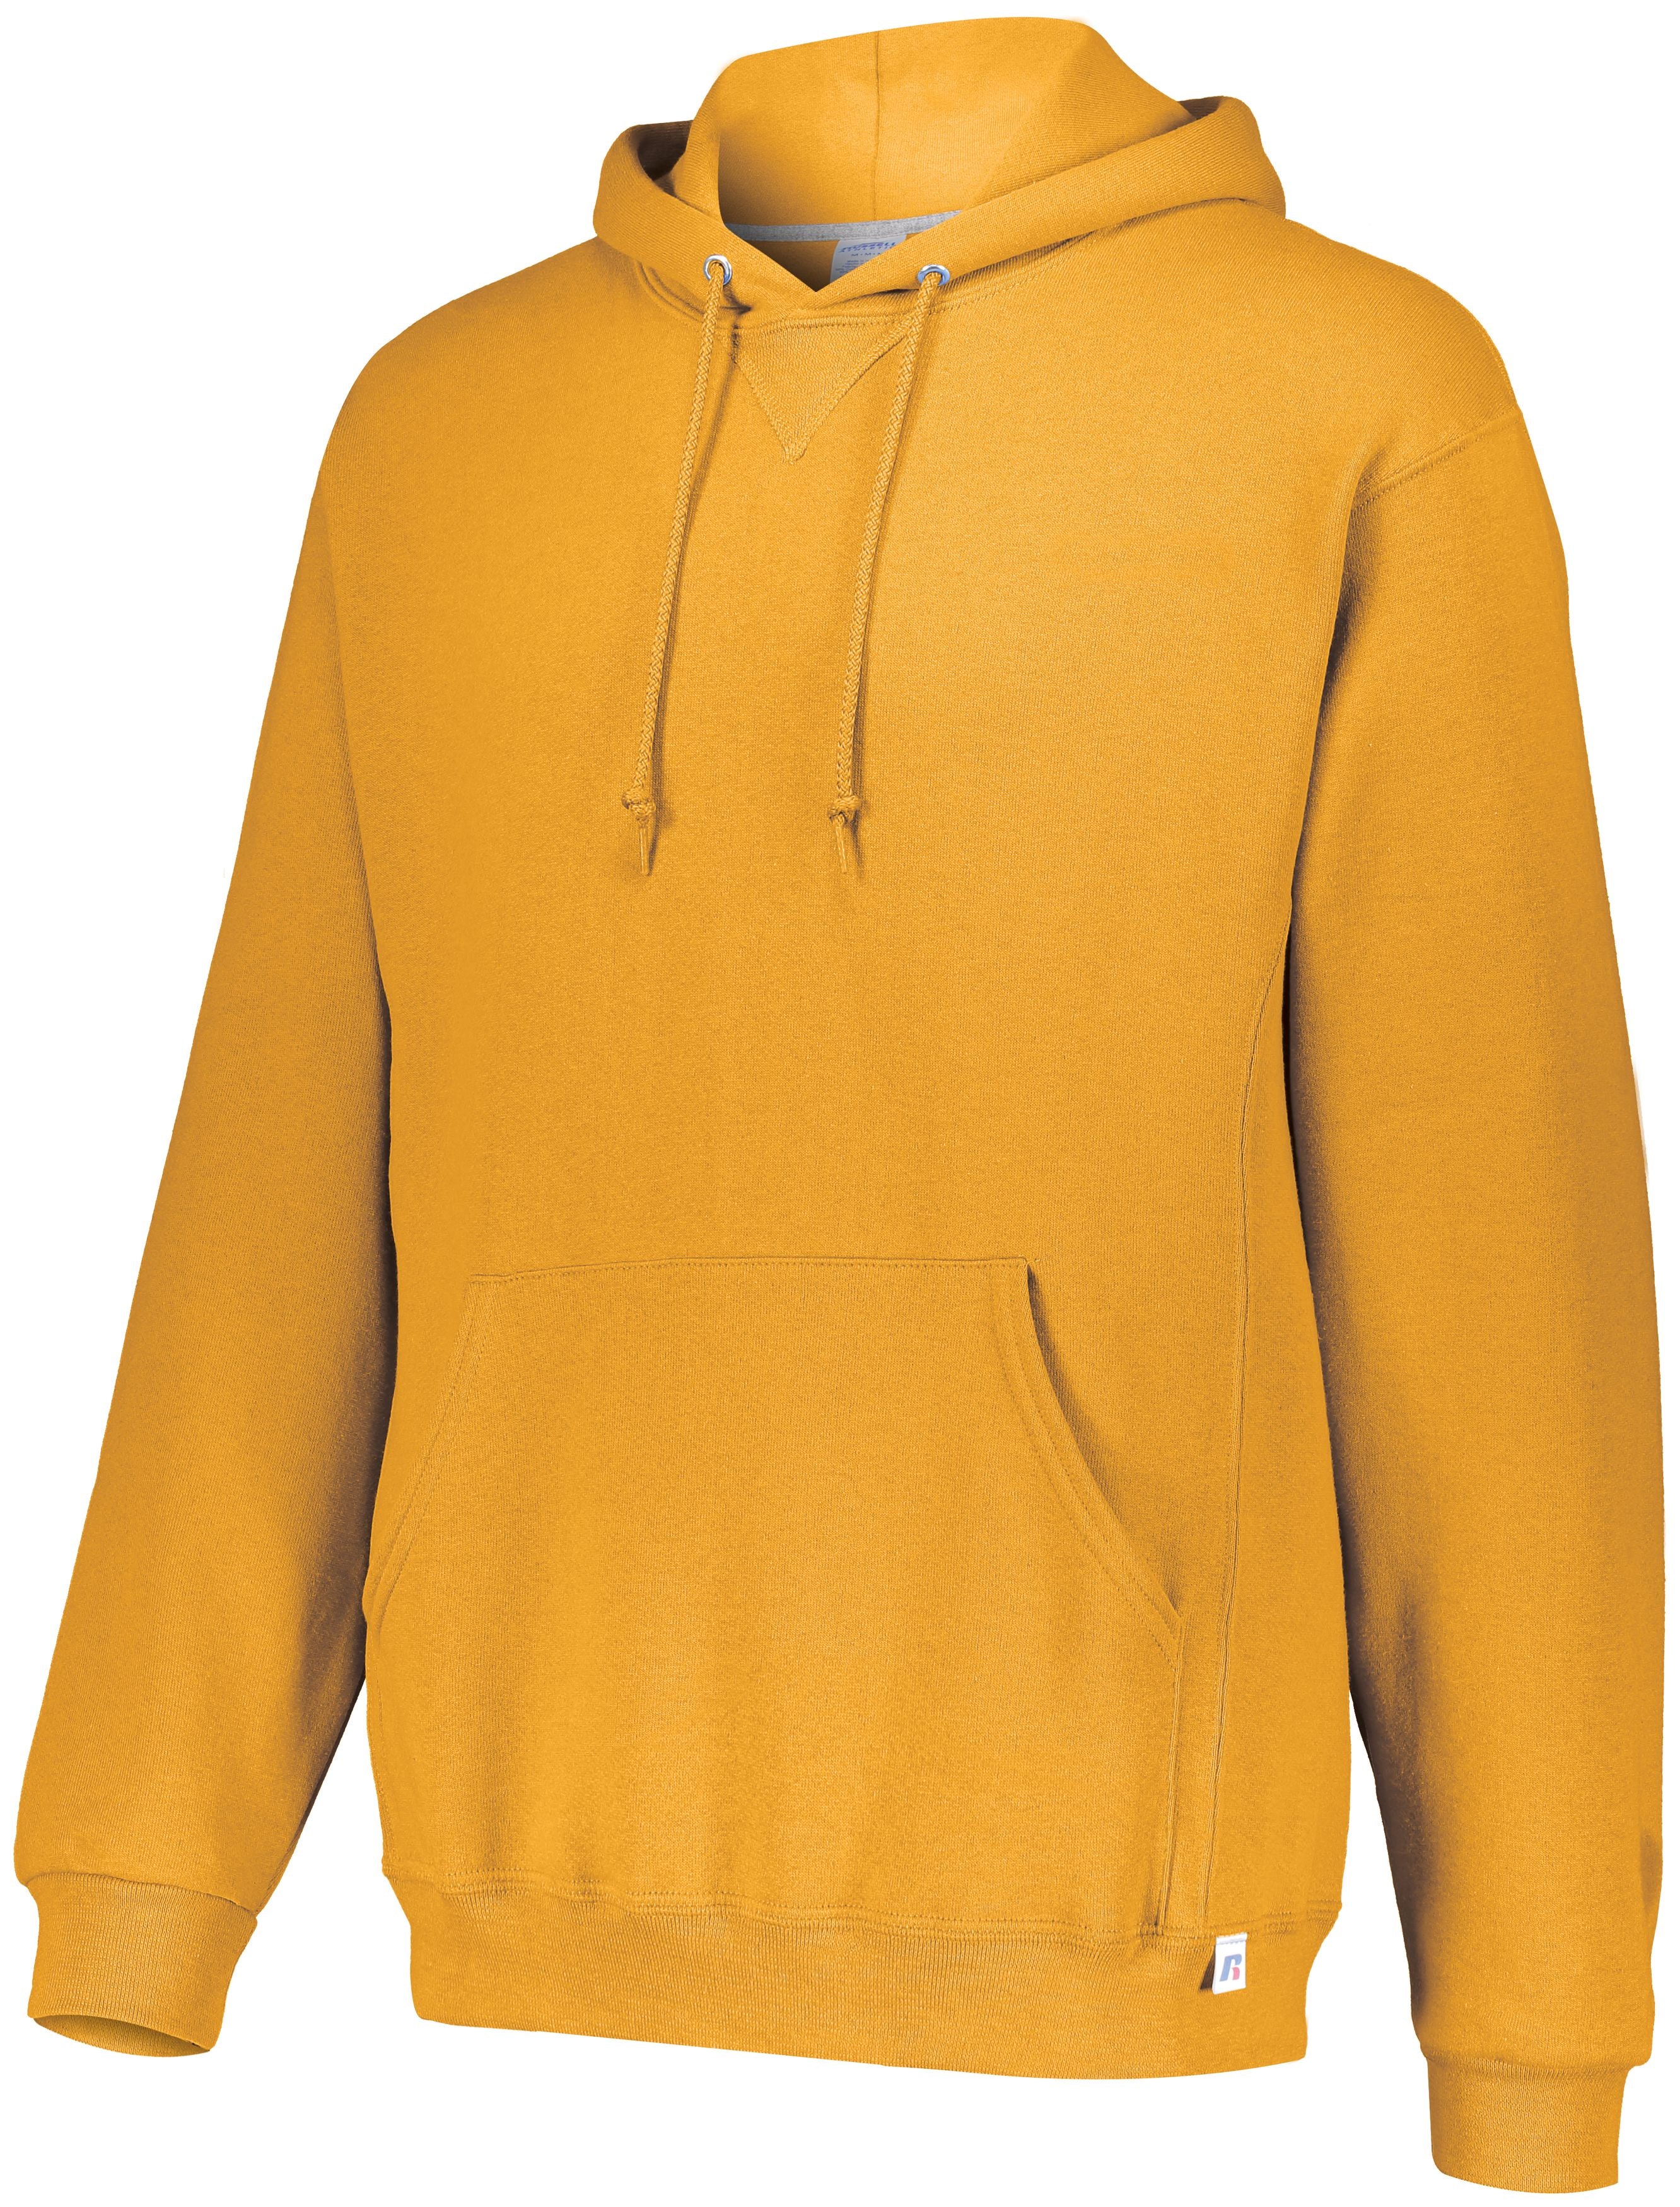 Russell Athletic Dri-Power Fleece Hoodie in Gold  -Part of the Adult, Russell-Athletic-Products, Shirts product lines at KanaleyCreations.com